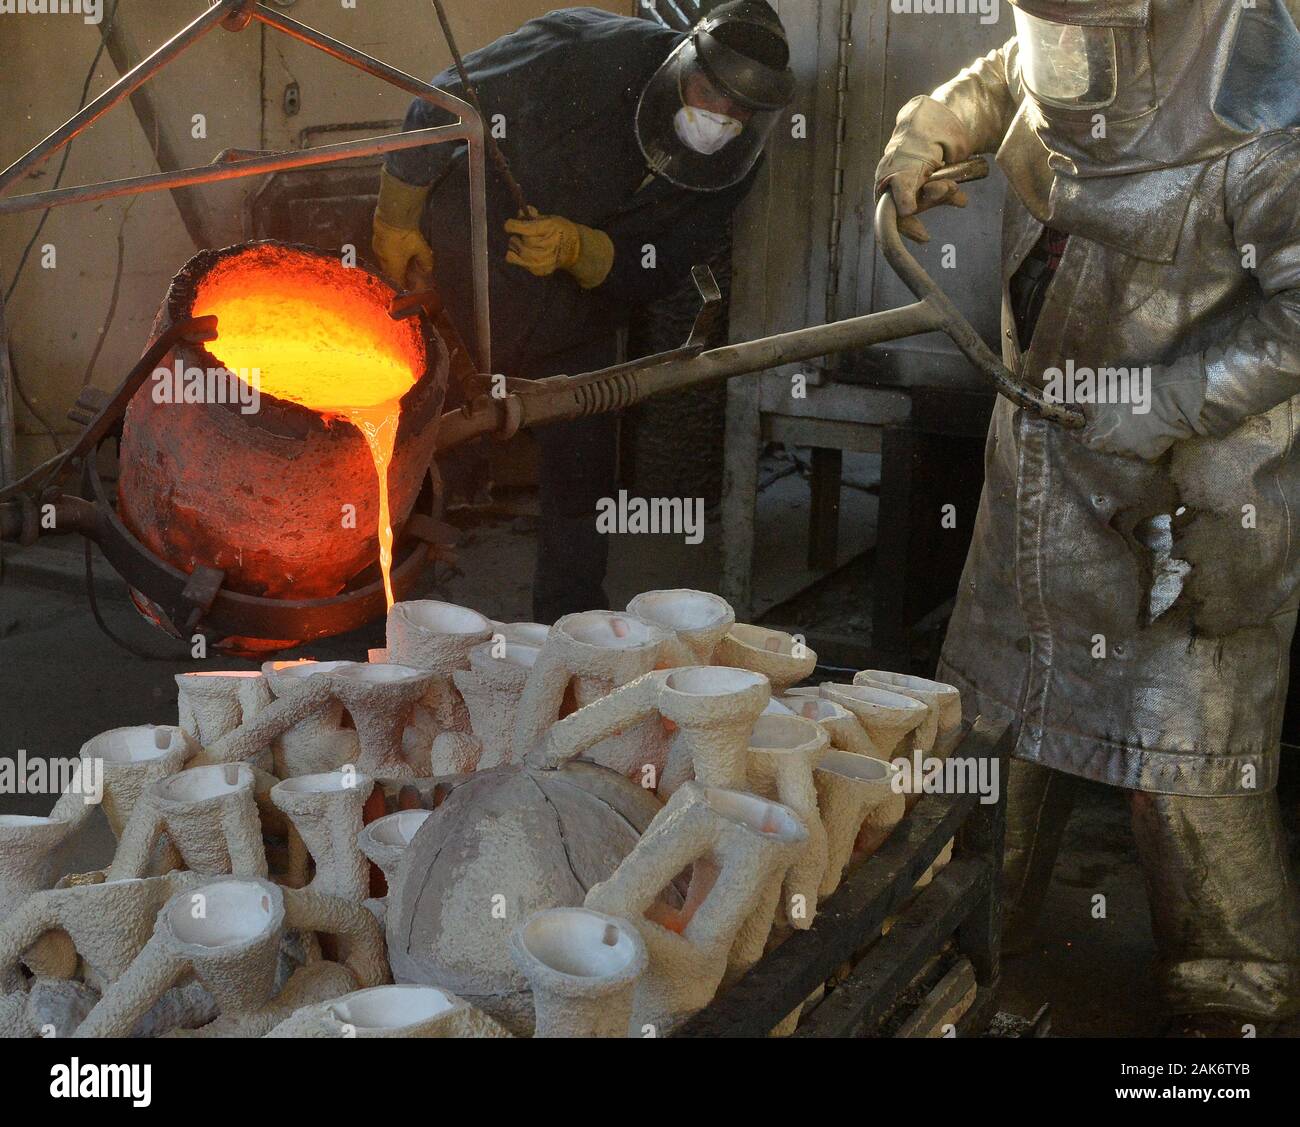 Workers in fire suits pour molten bronze metal into molds during the casting of the Screen Actors Guild Award statuettes at the American Fine Arts Foundry in Burbank, California on Tuesday, January 7, 2020. Winners are to be announced during a live simulcast on TNT and TBS in Los Angeles on January 19, 2020. Photo by Jim Ruymen/UPI Credit: UPI/Alamy Live News Stock Photo